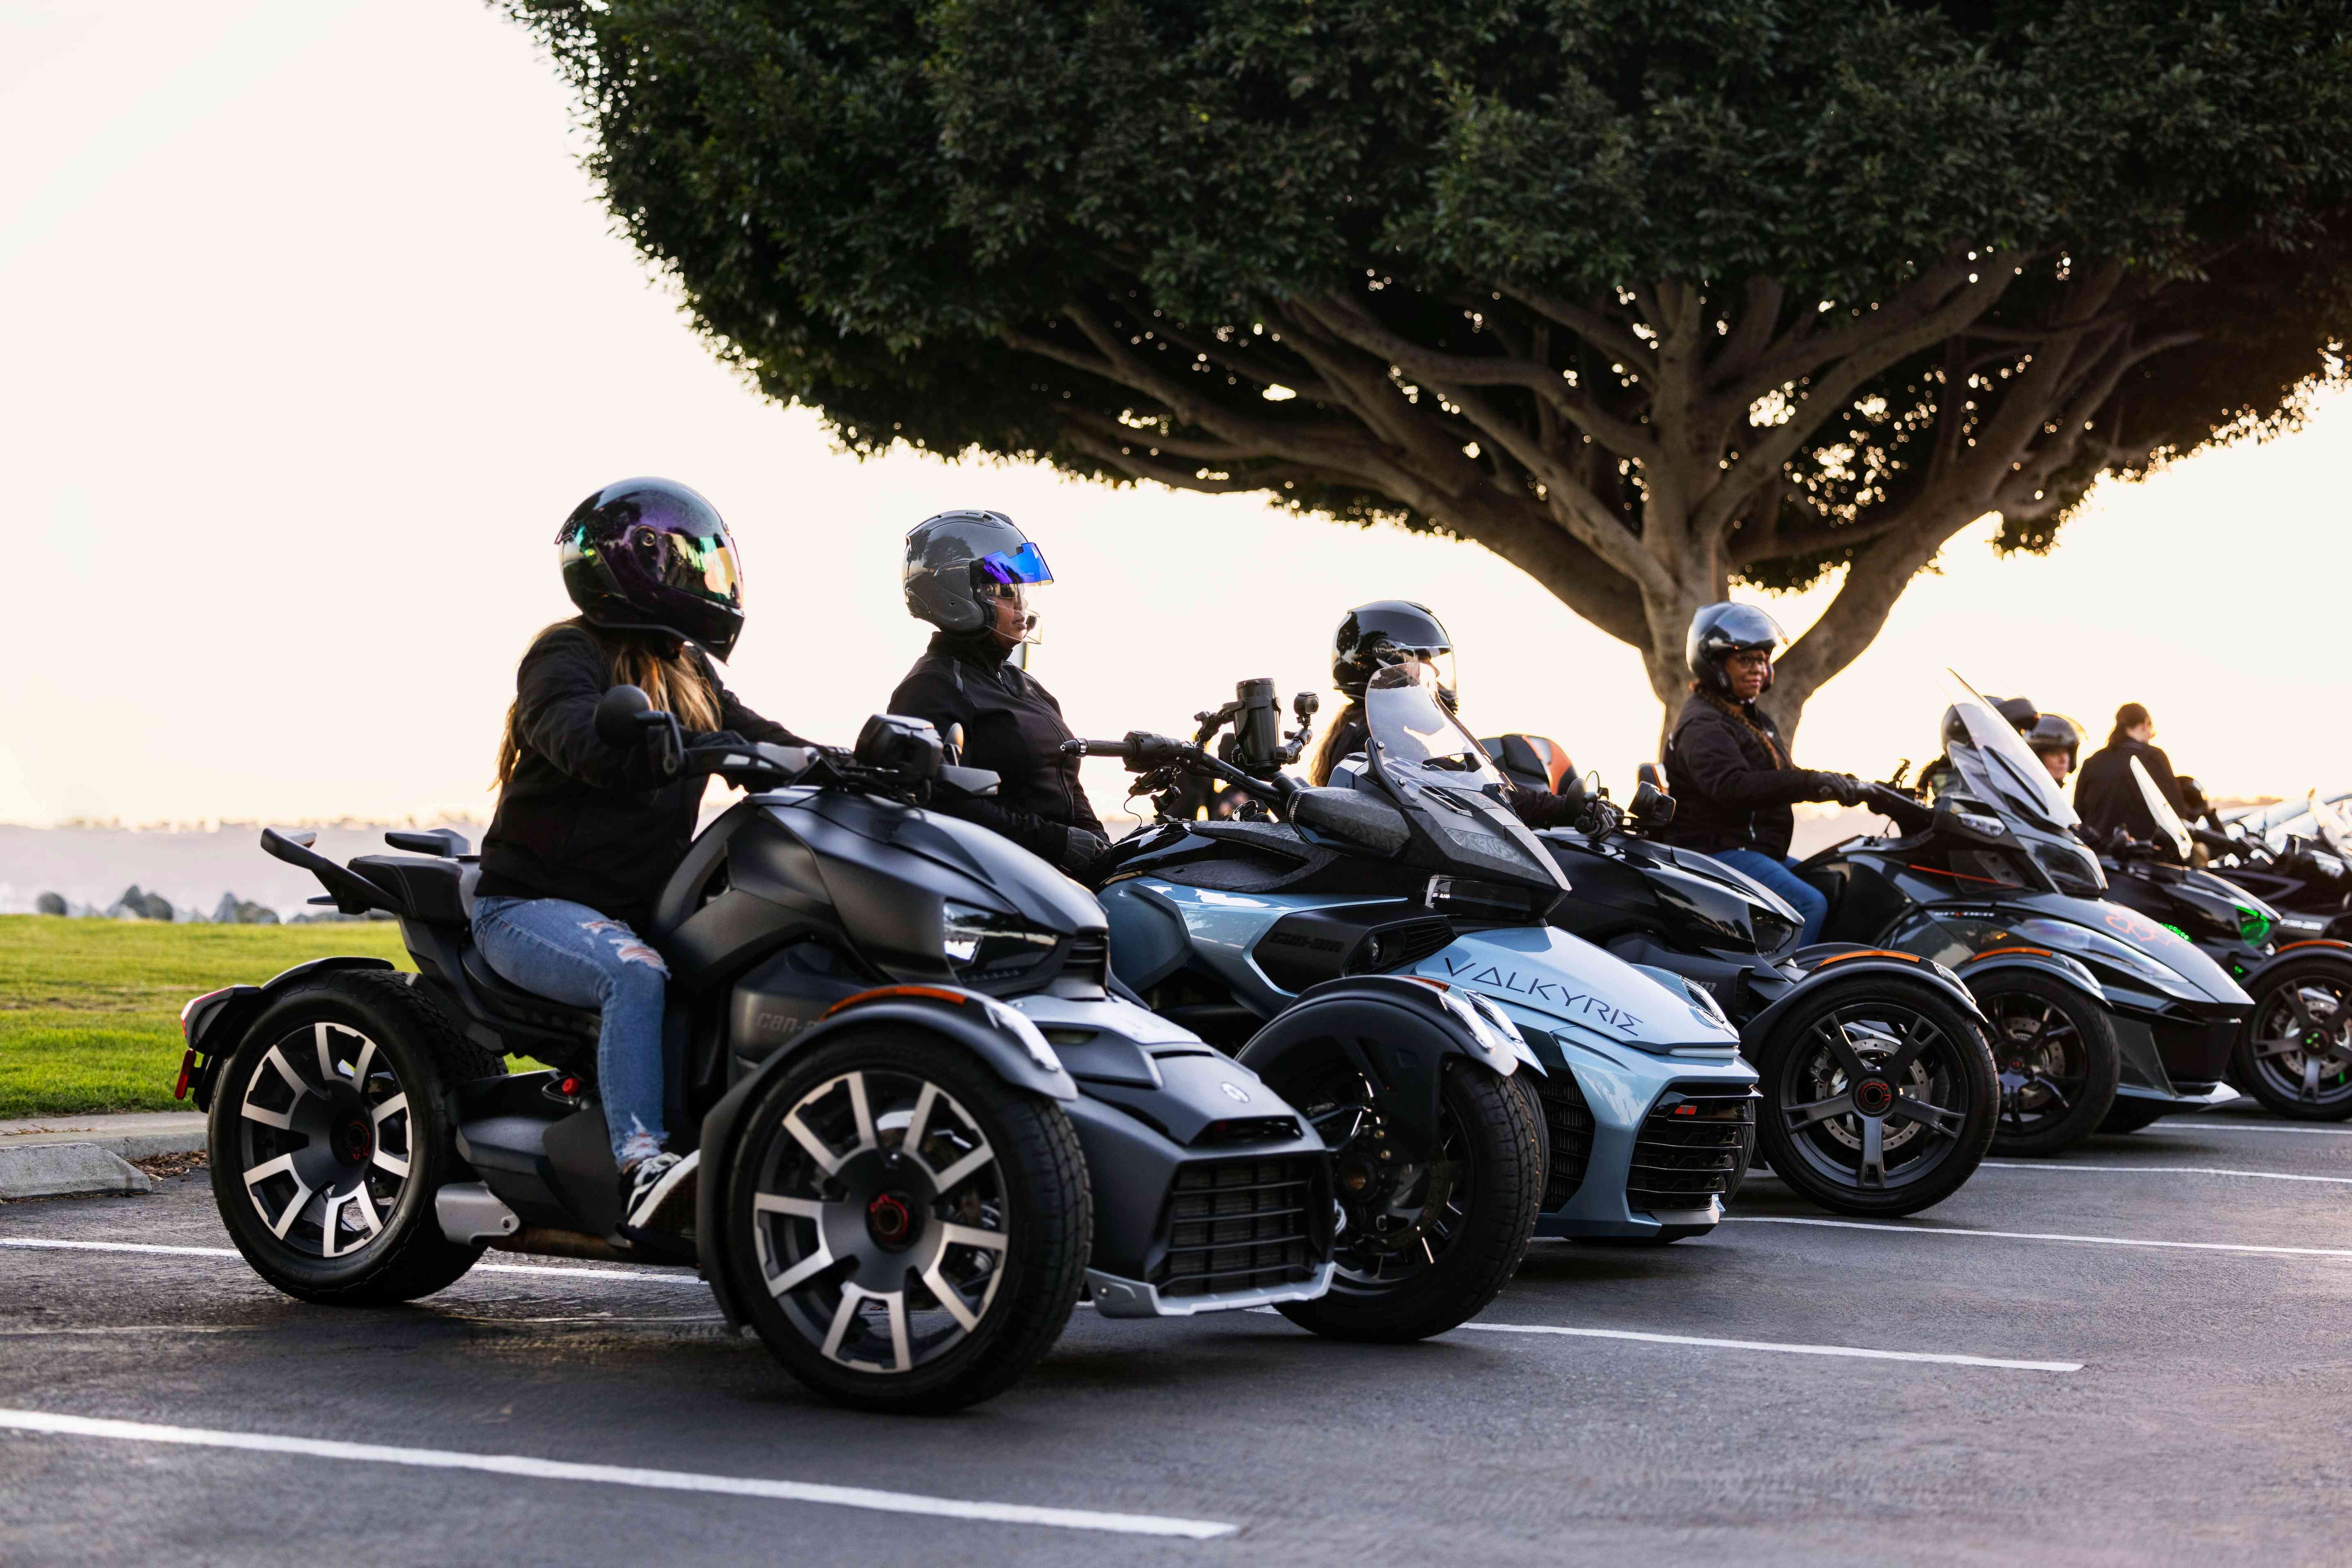 A group of women riders talking near a Can-Am vehicle